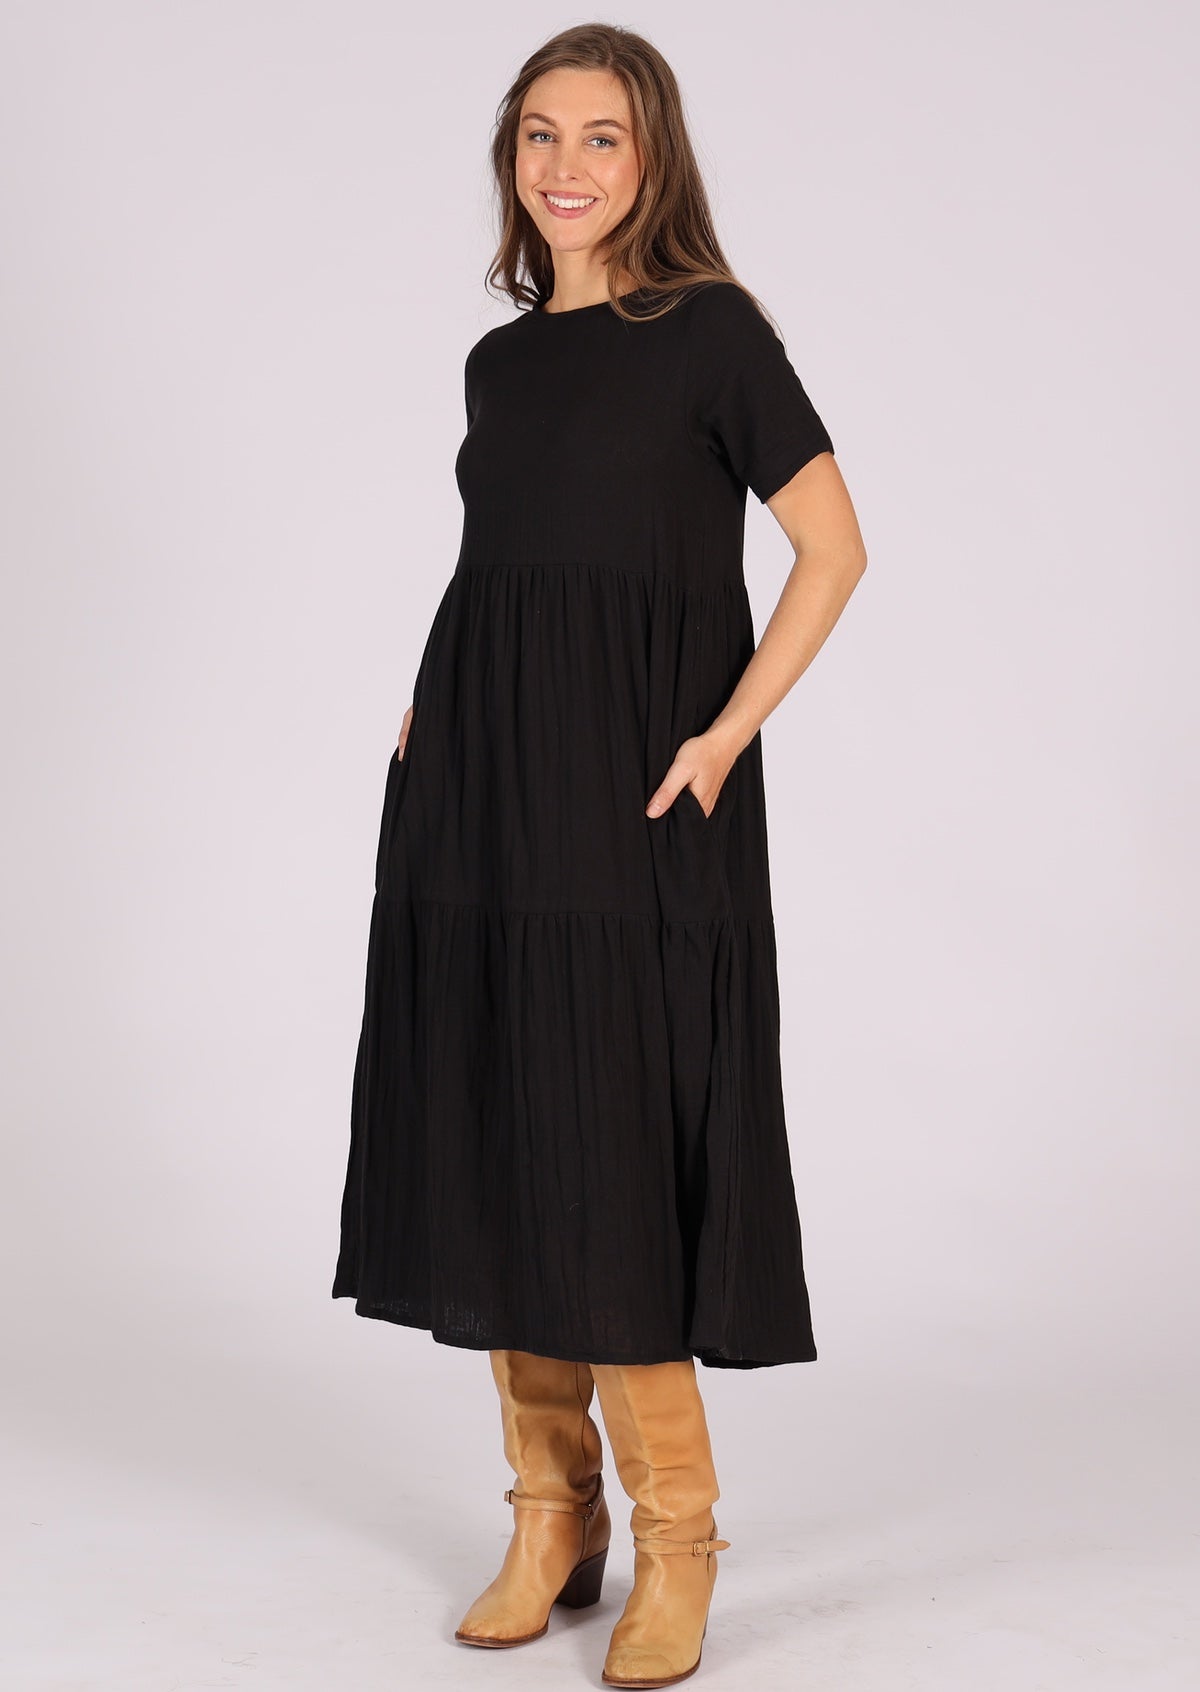 Black lightweight cotton tiered dress with short sleeves and pockets